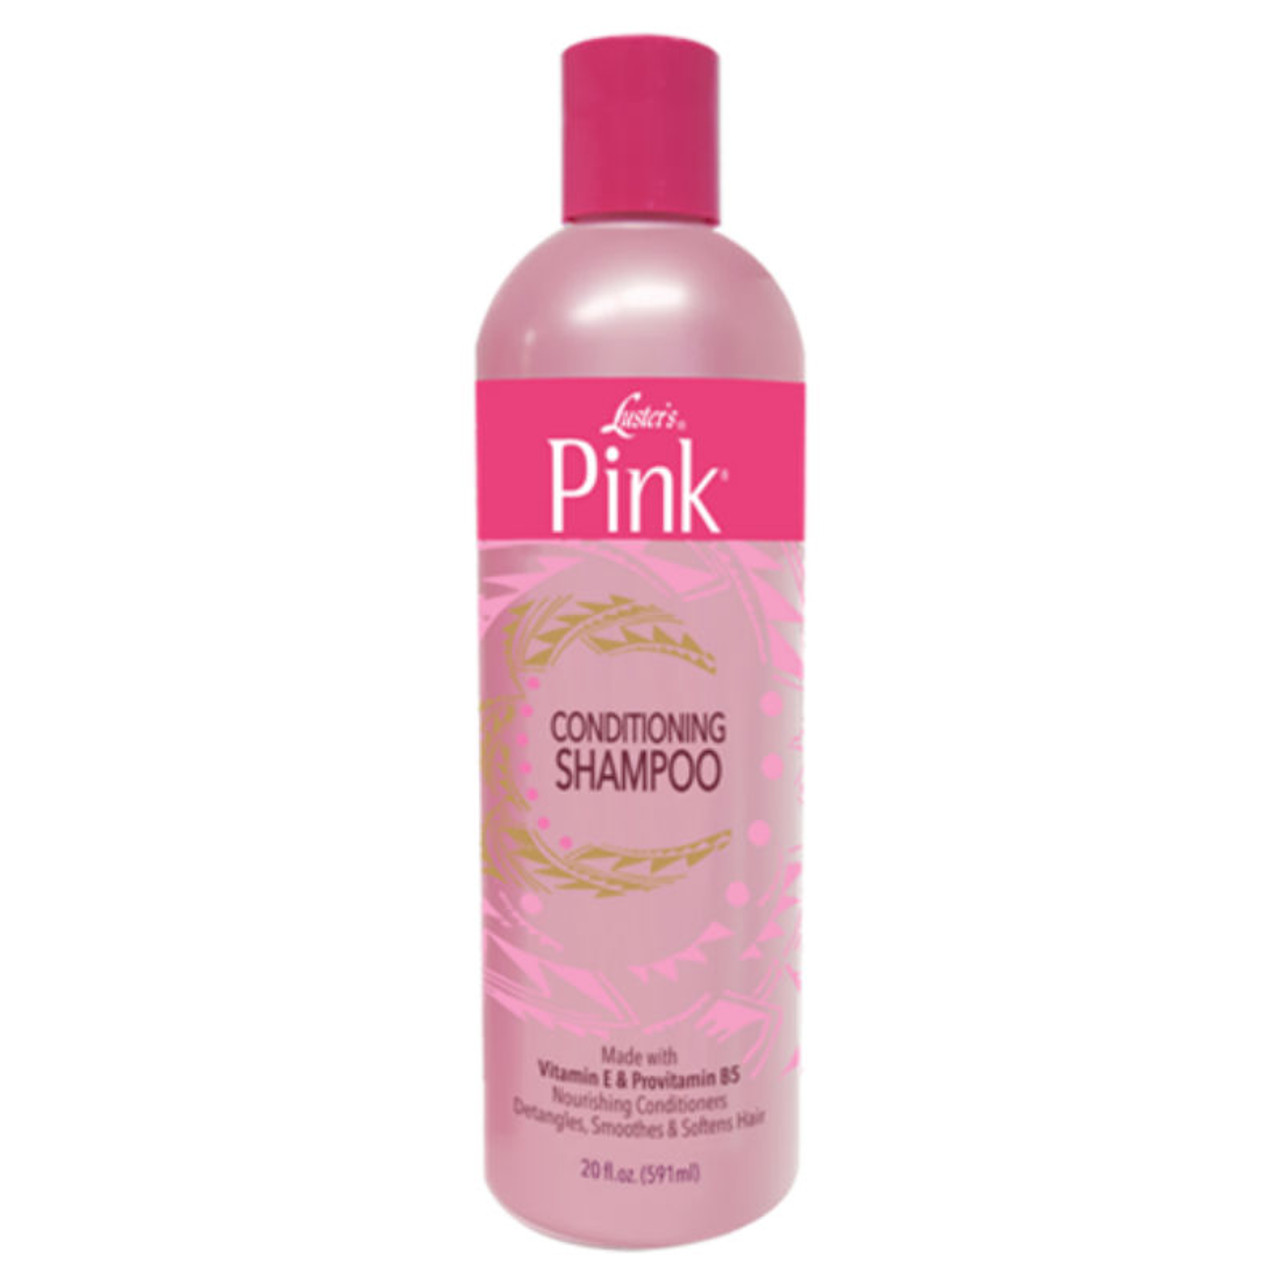 Luster's Pink Conditioning Shampoo (12 oz.) -